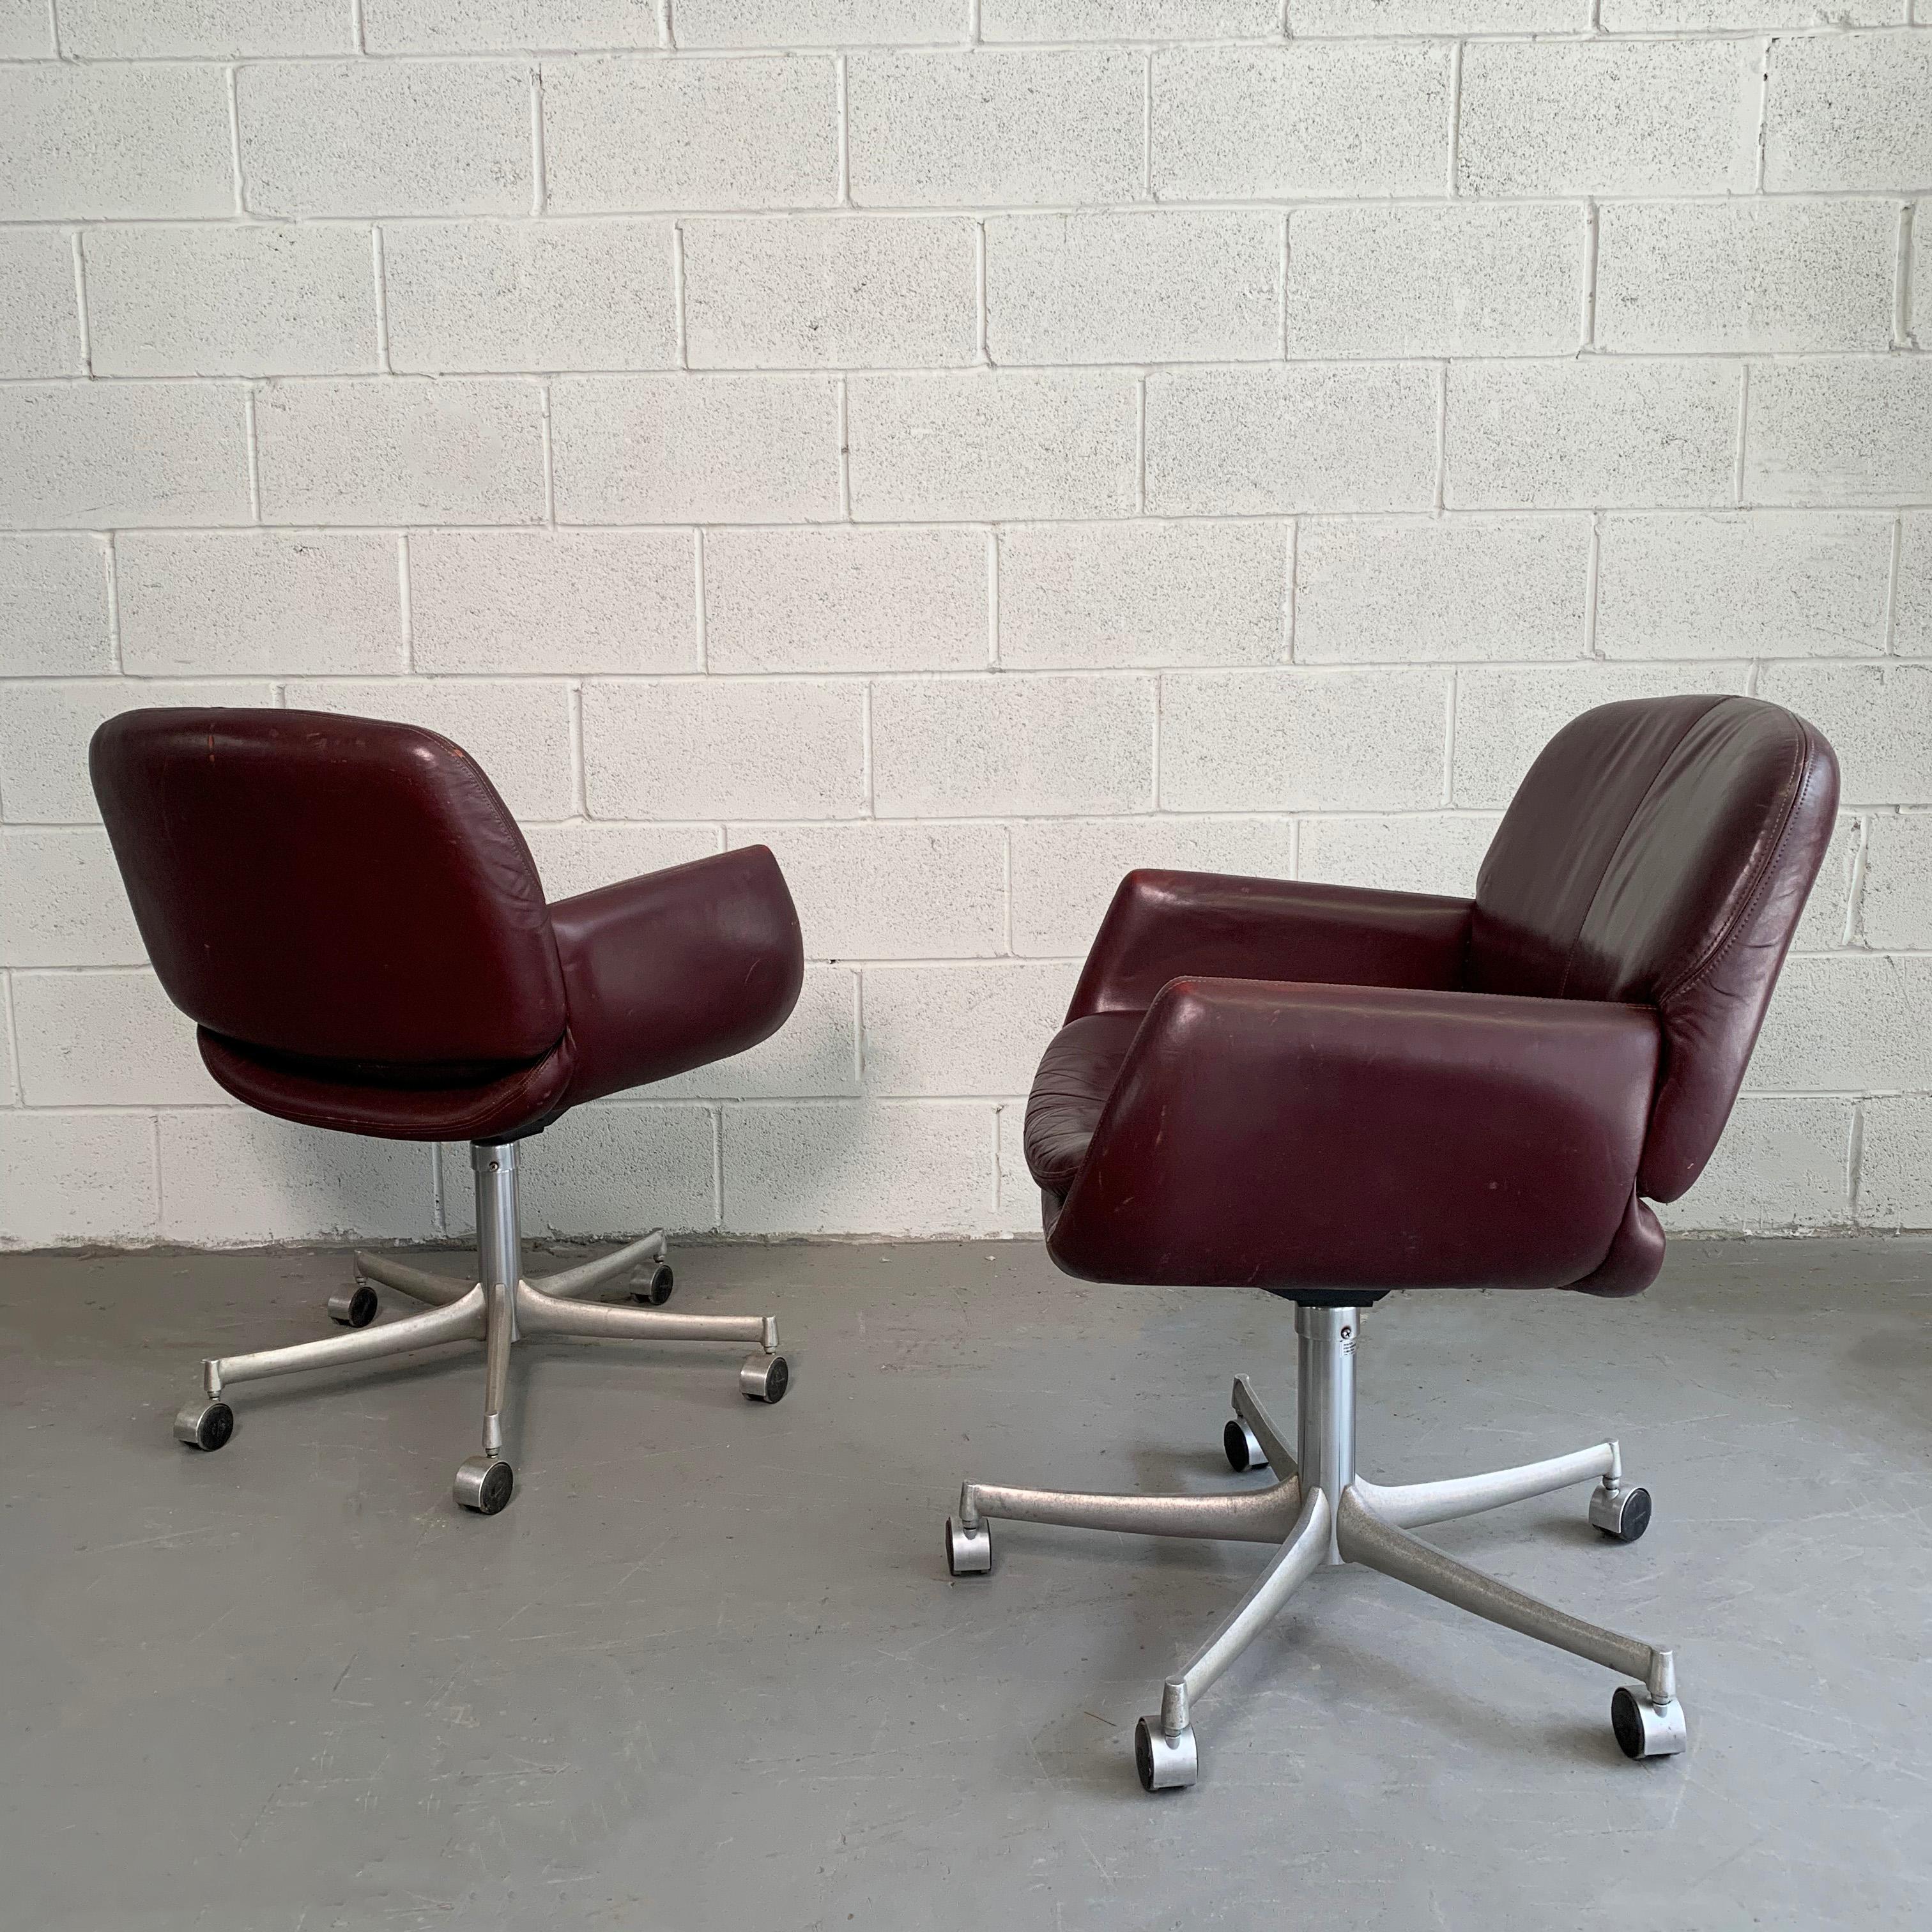 American Pair of Mid-Century Modern Leather Office Swivel Armchairs